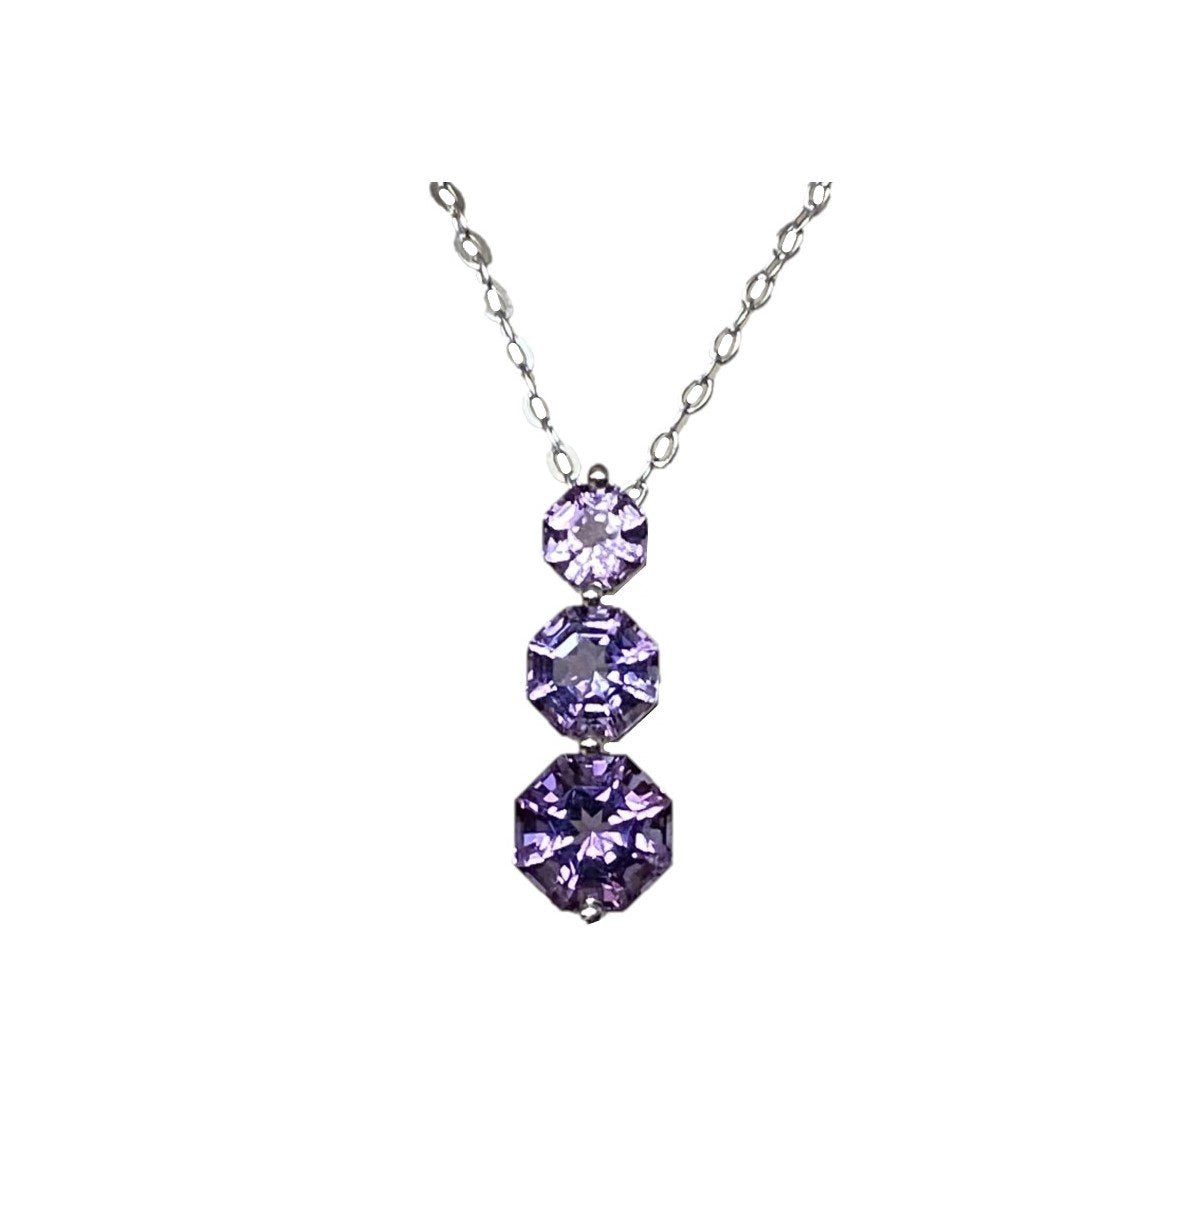 FARA Three Stone Amethyst Drop Pendant Necklace for Women, Sterling Silver with 18 inch Chain